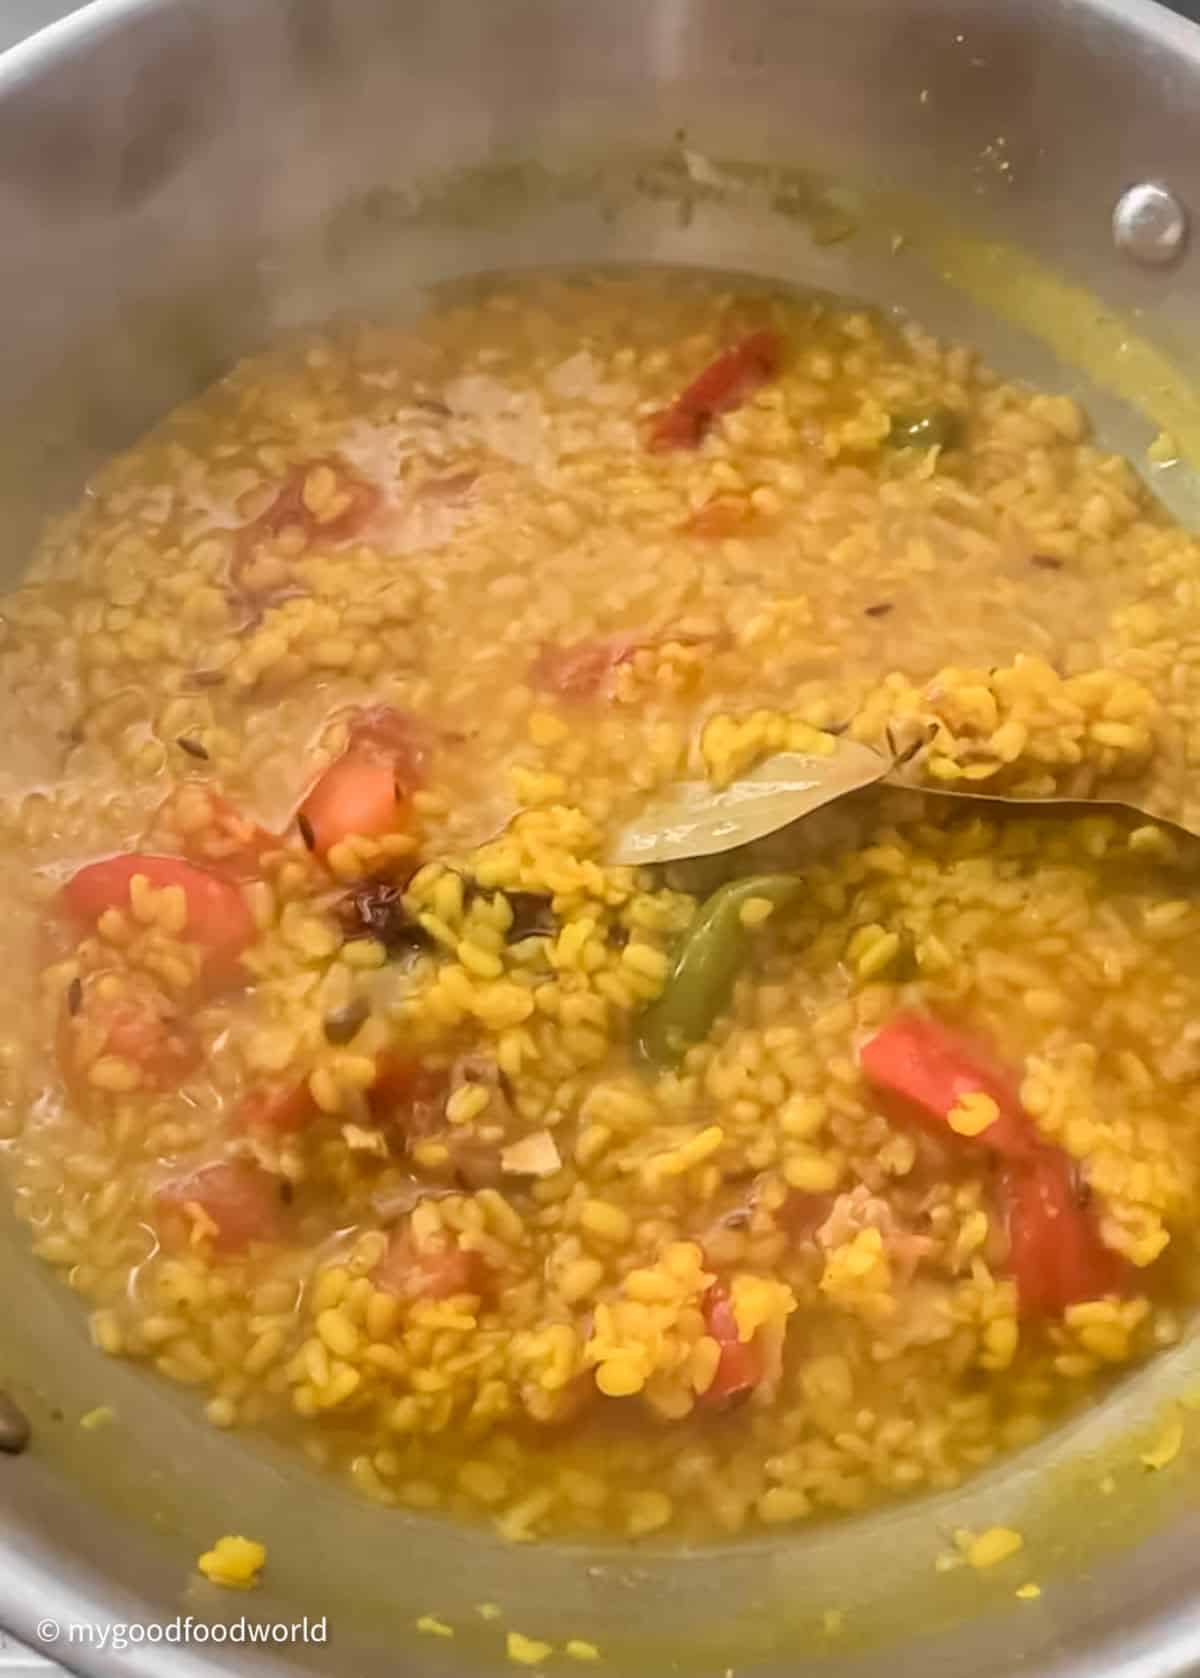 Bhaja moong lentils with tomatoes, bay leaves and other spices is cooking in a pan.